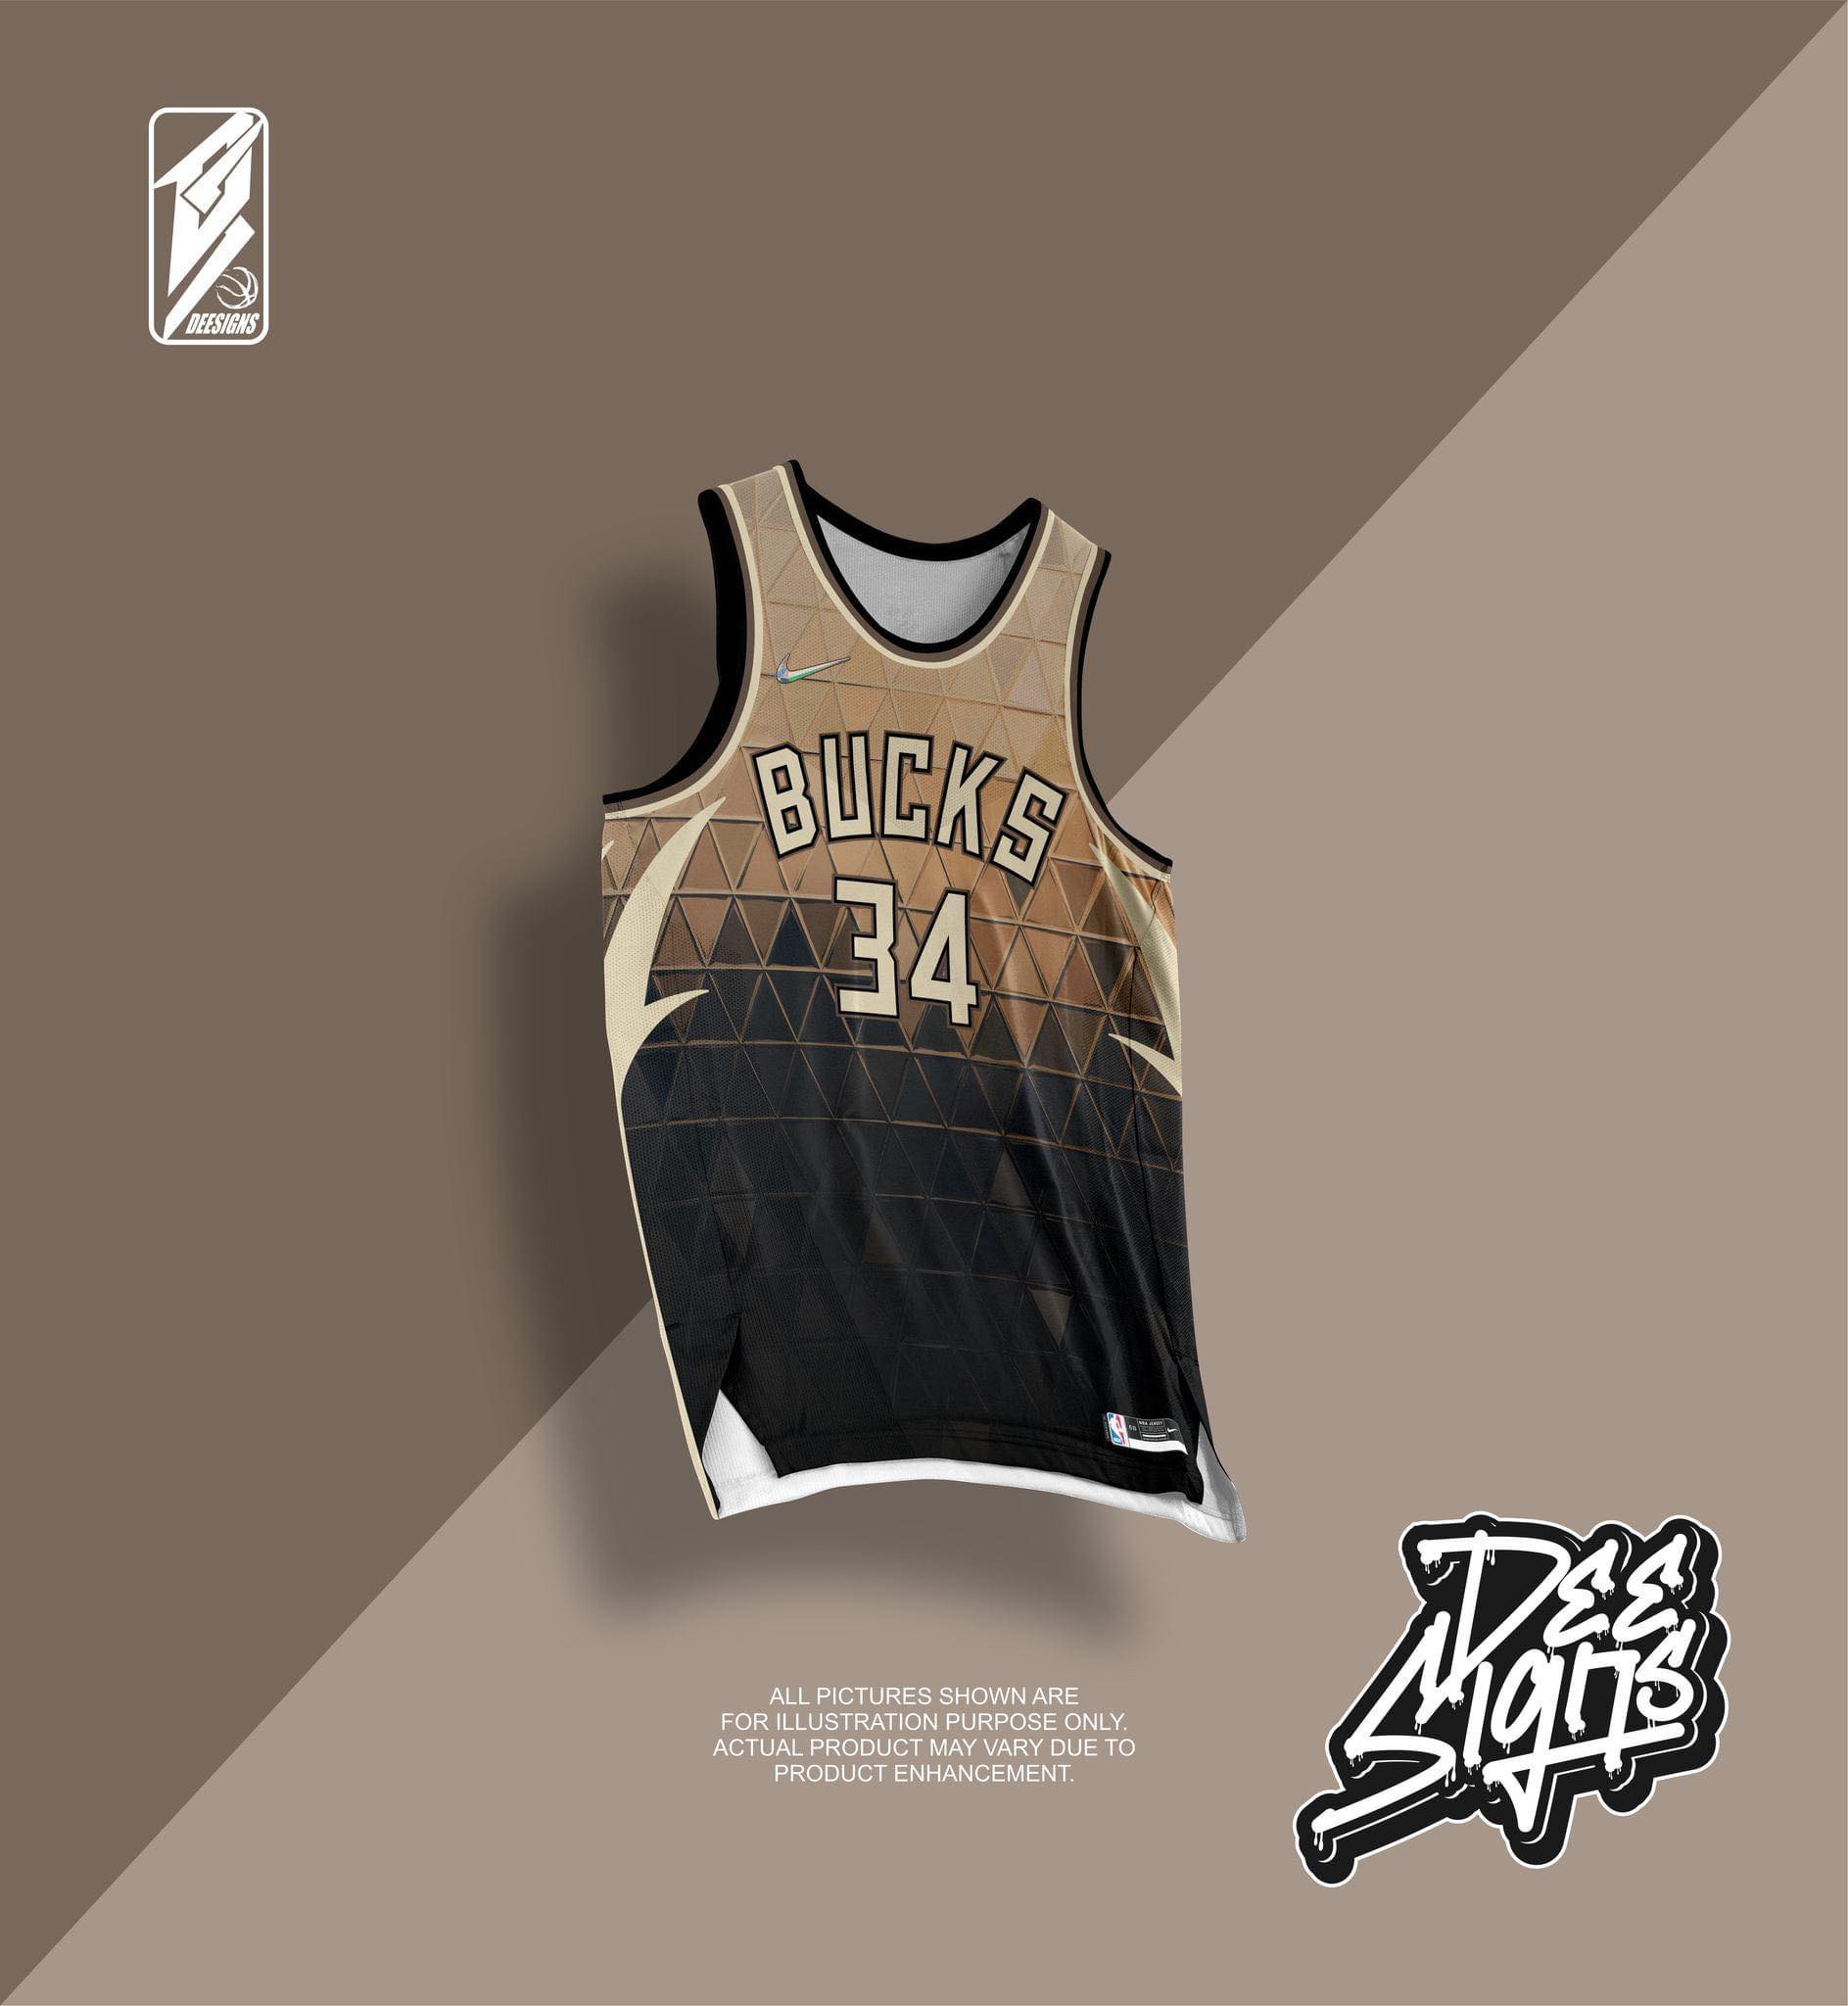 BASKETBALL MILWAUKEE 10 JERSEY FREE CUSTOMIZE OF NAME AND NUMBER ONLY full  sublimation high quality fabrics/ trending jersey